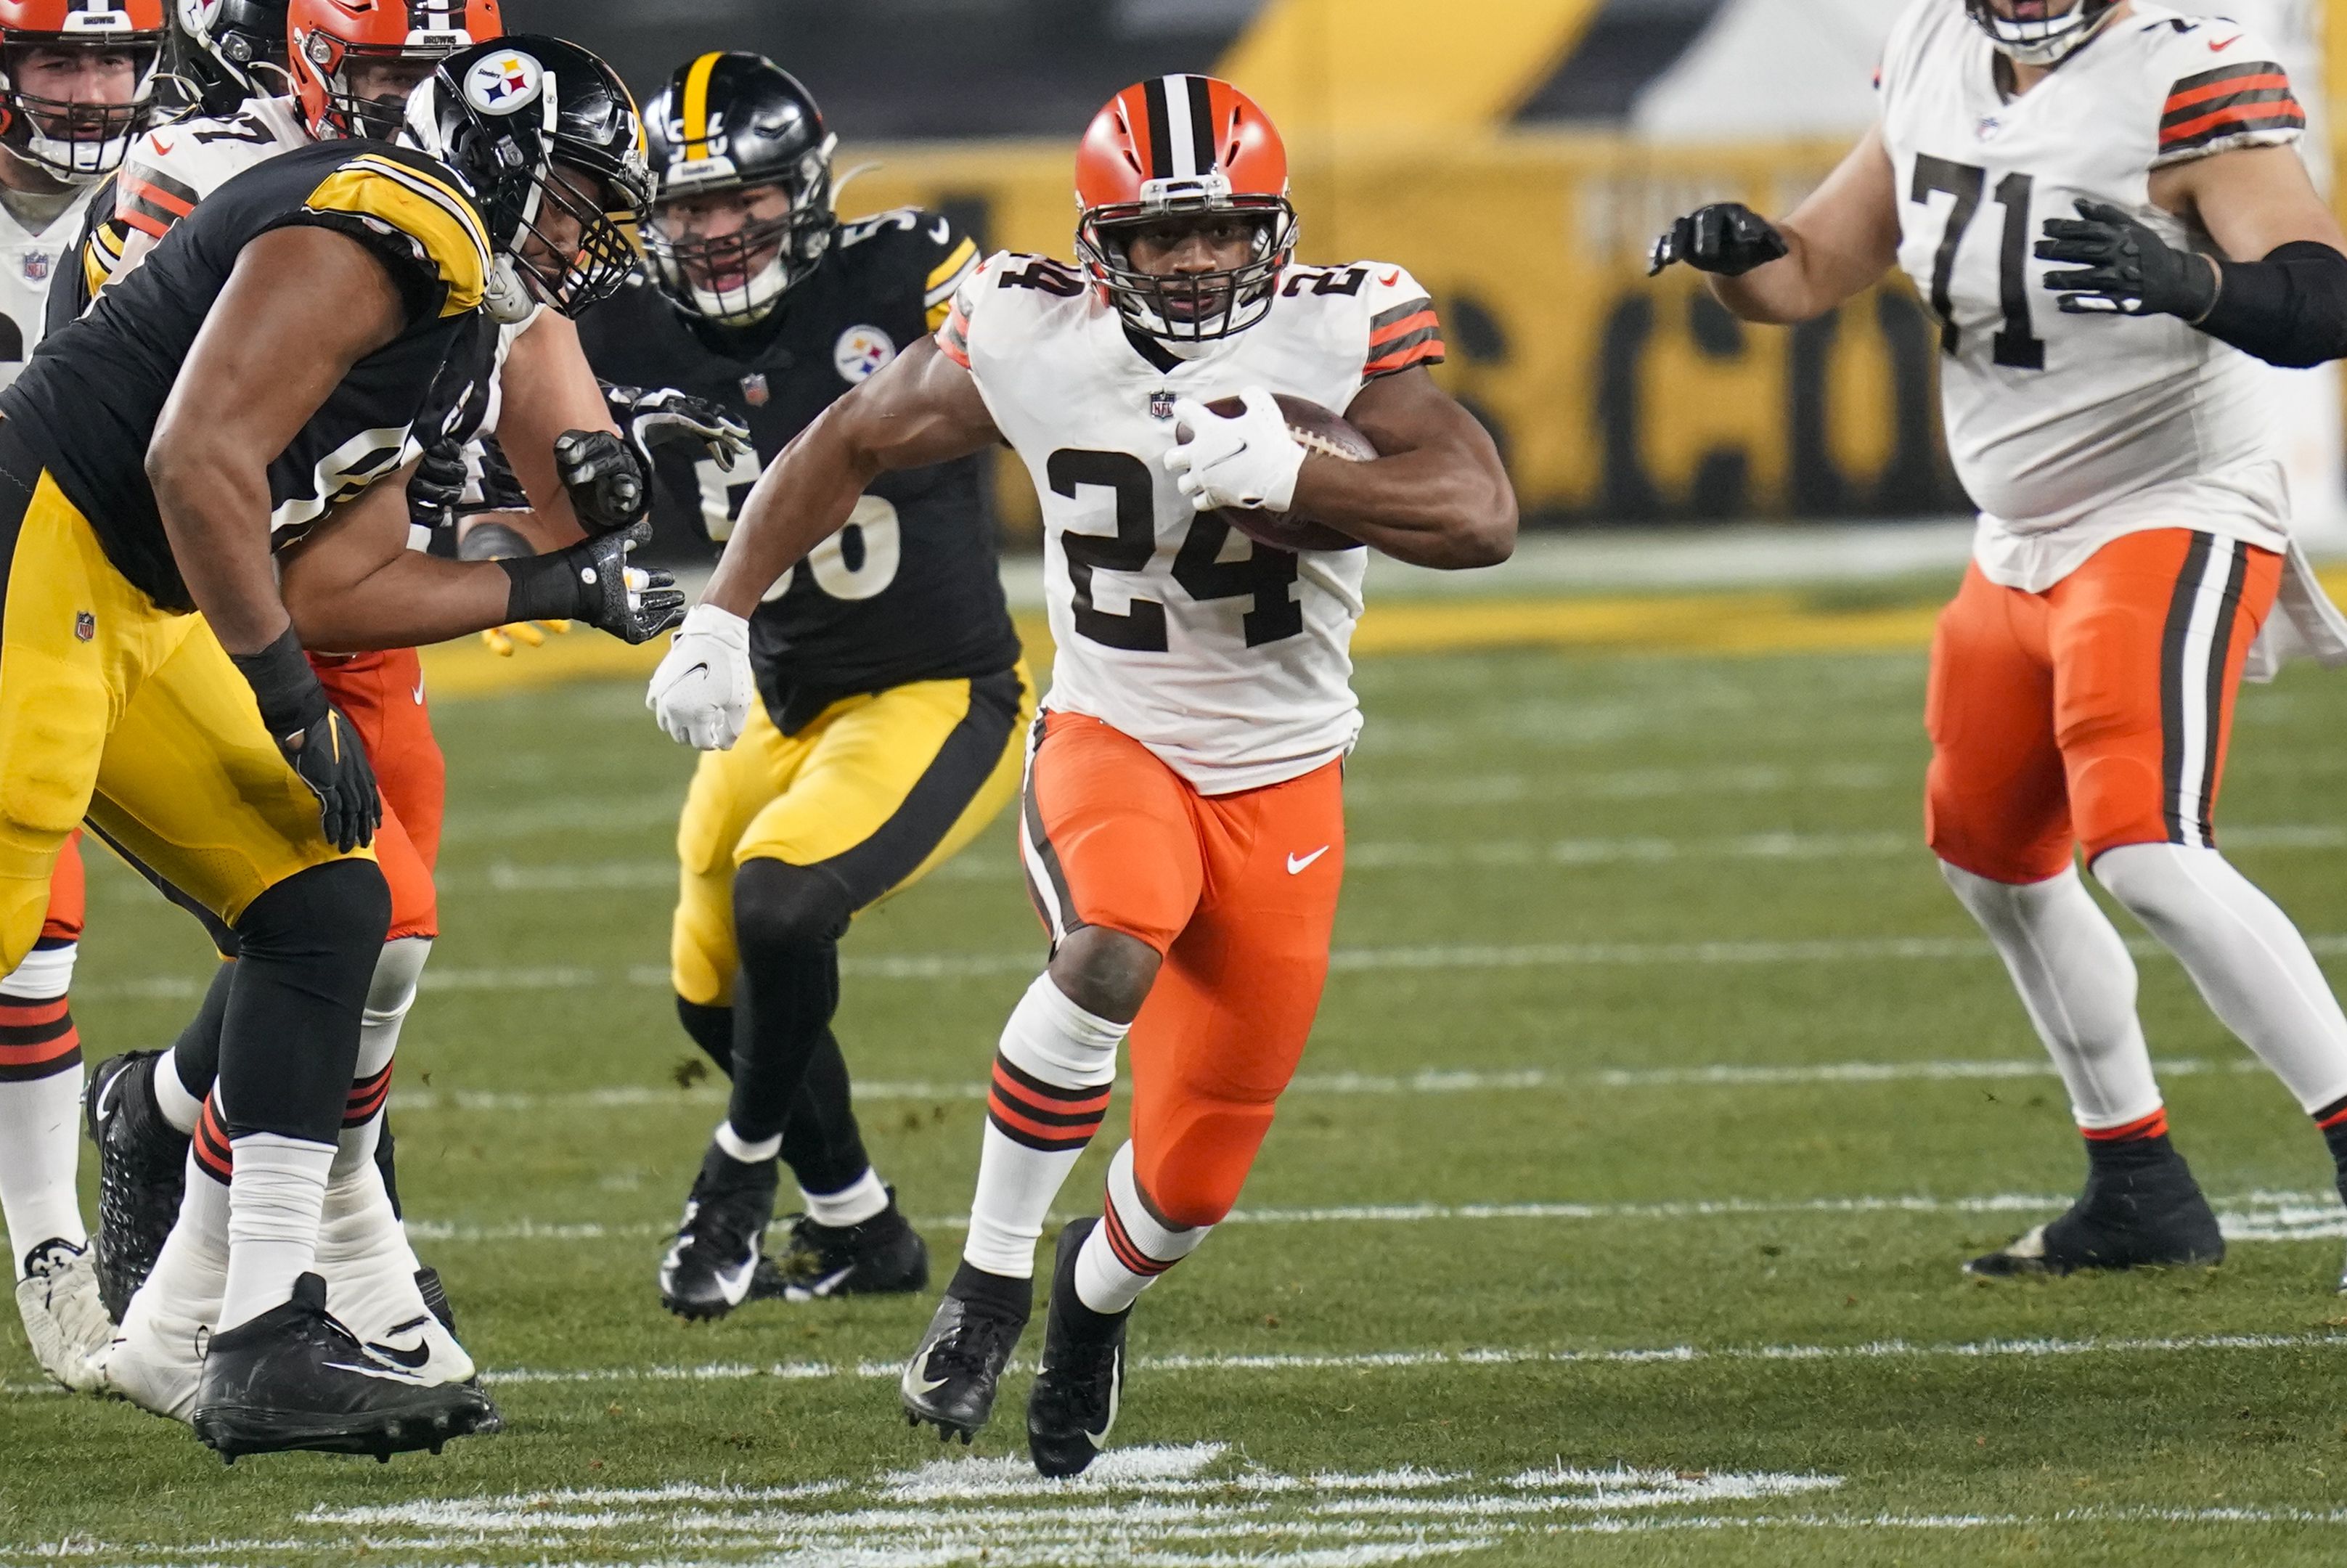 EXPLAINER: How to watch Steelers vs Browns Thursday Night Football game